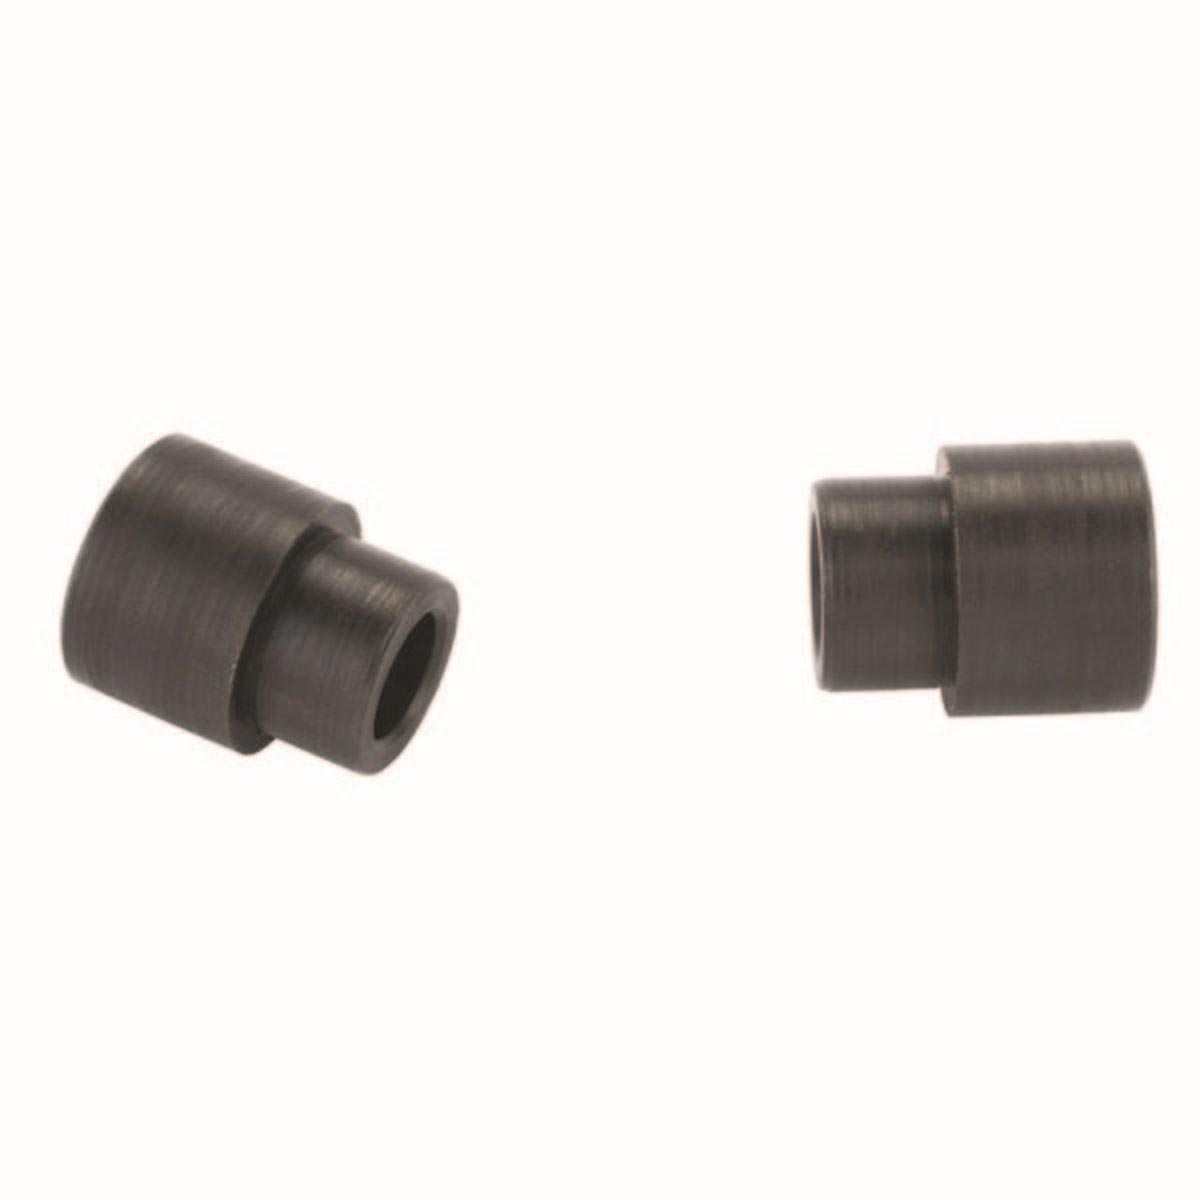 Bushings For Attraction Magnetic Ballpoint & Rollerball Pen Kits